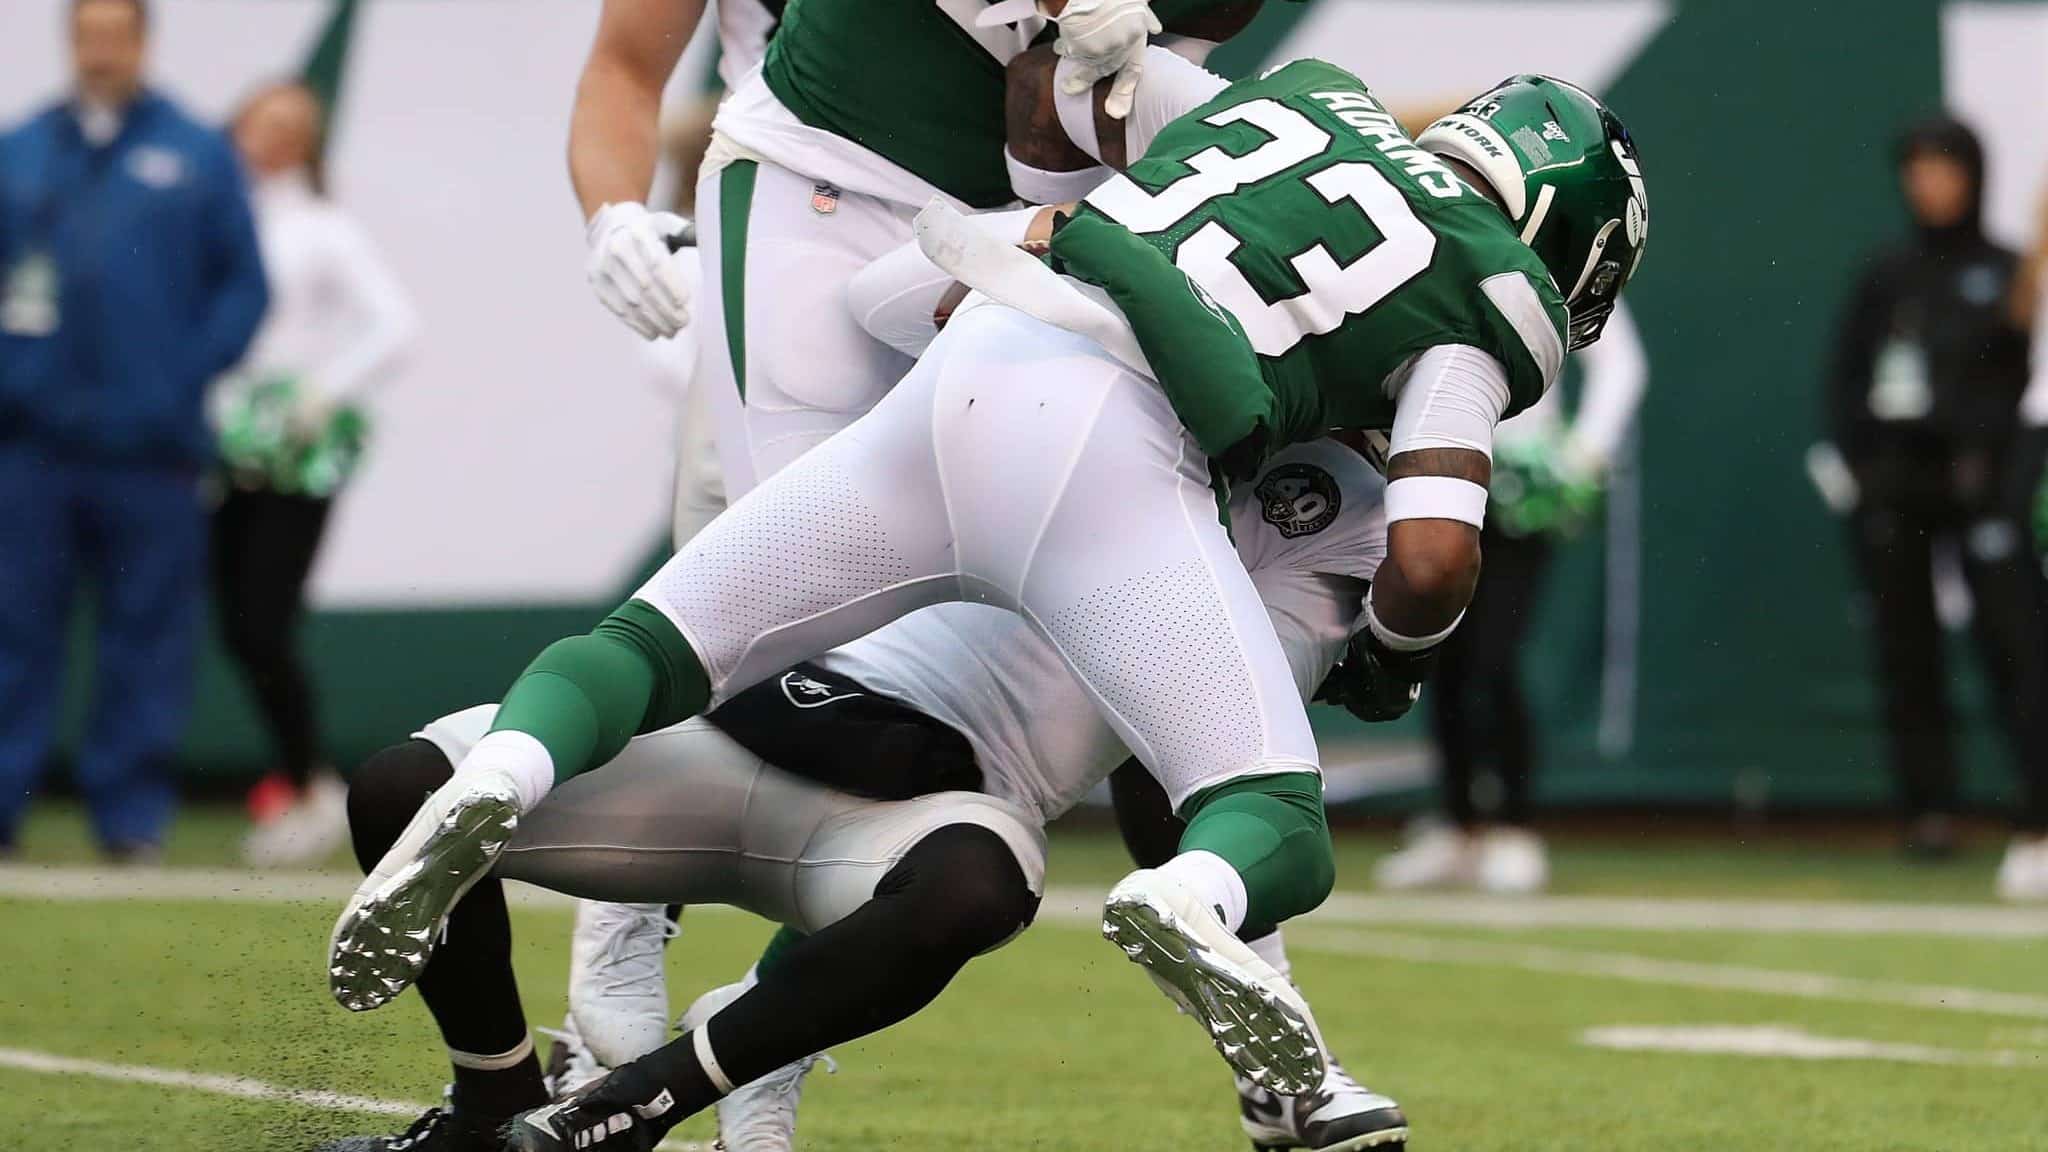 EAST RUTHERFORD, NEW JERSEY - NOVEMBER 24: Jamal Adams #33 of the New York Jets sacks Derek Carr #4 of the Oakland Raiders during their game at MetLife Stadium on November 24, 2019 in East Rutherford, New Jersey.